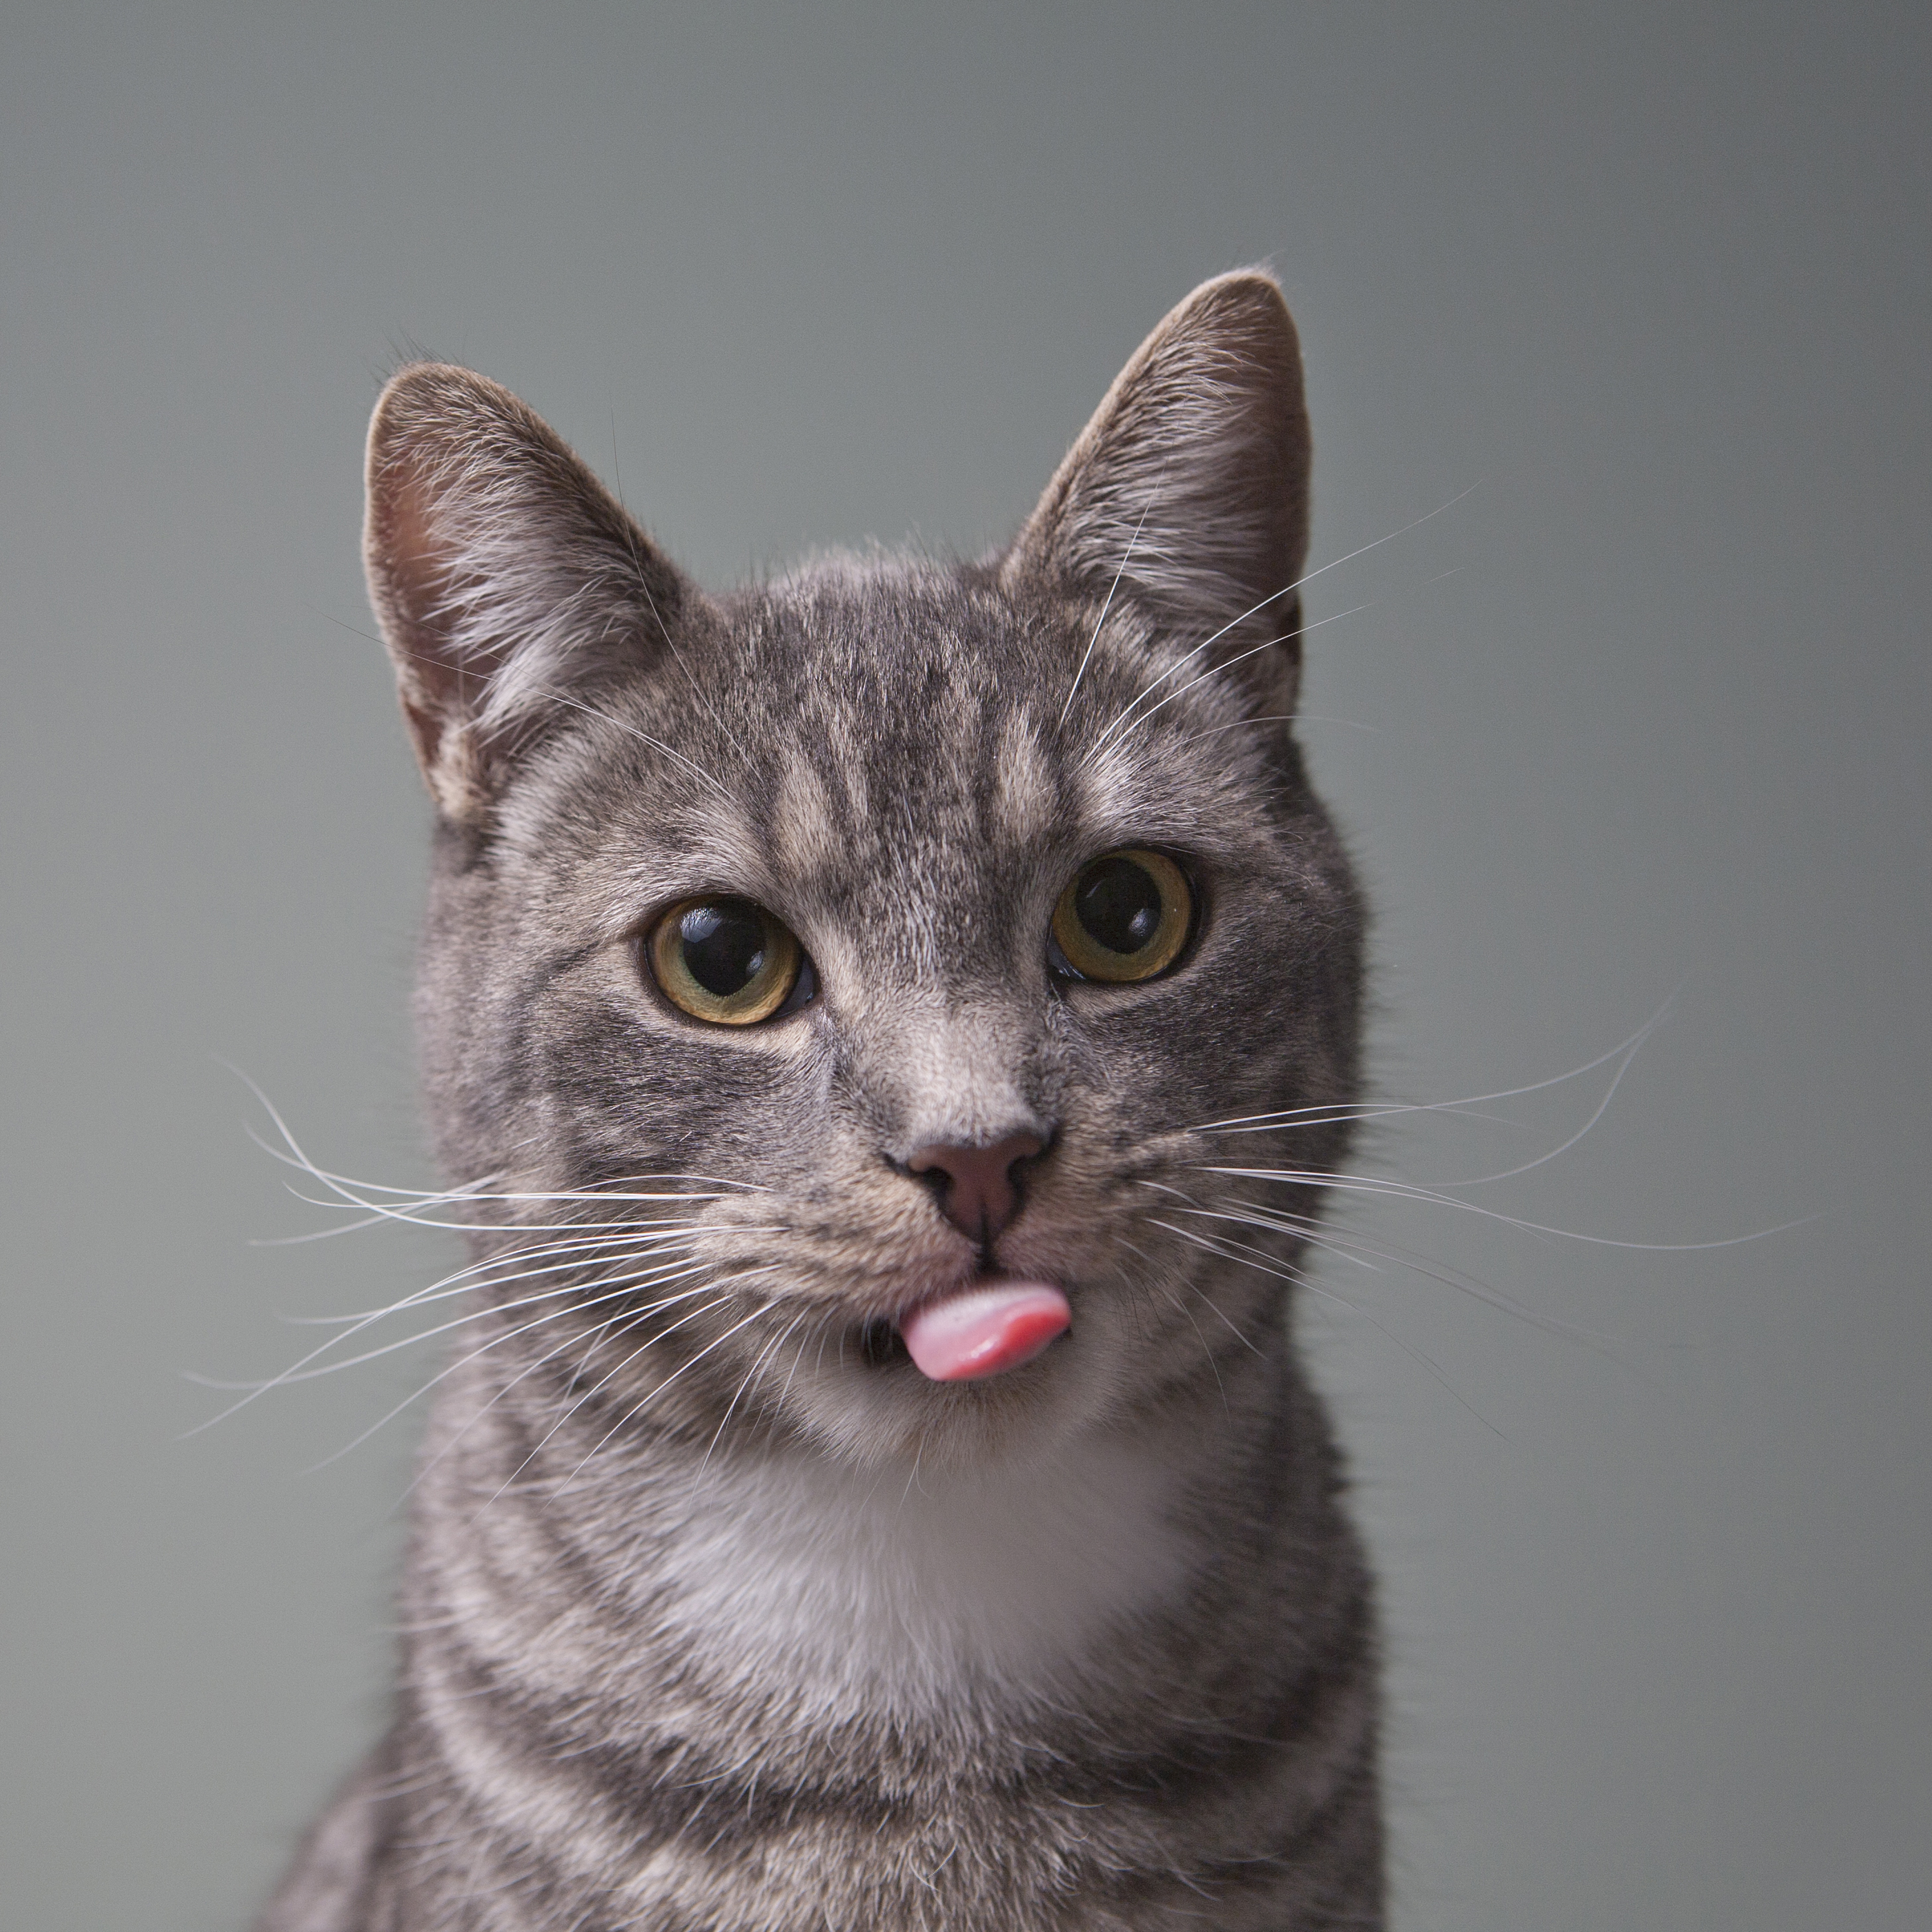 Cats Are Only Semidomesticated, Researchers Say | Time